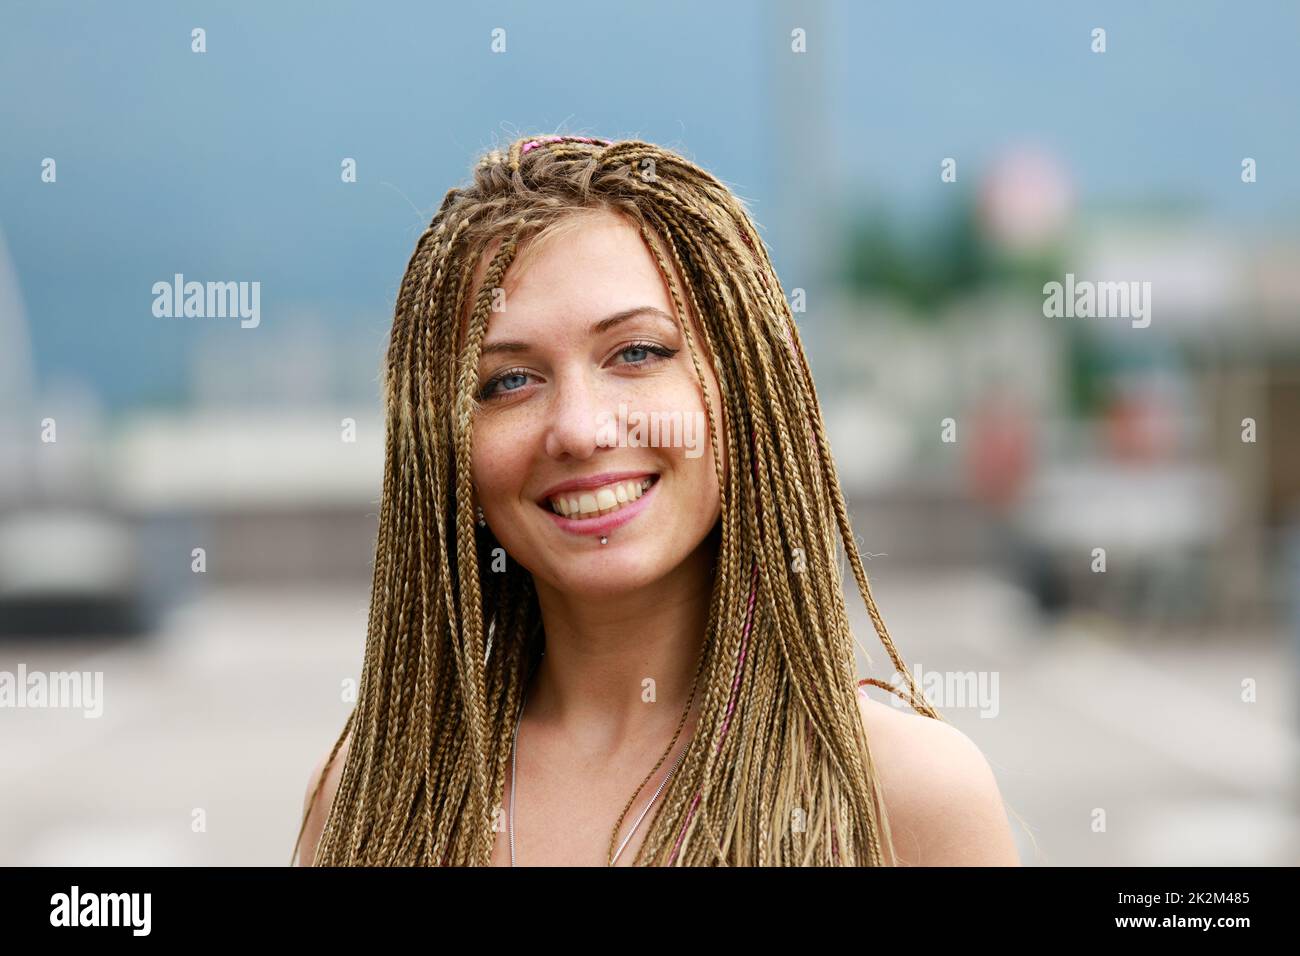 smiling woman in braided hairstyle outdoors Stock Photo